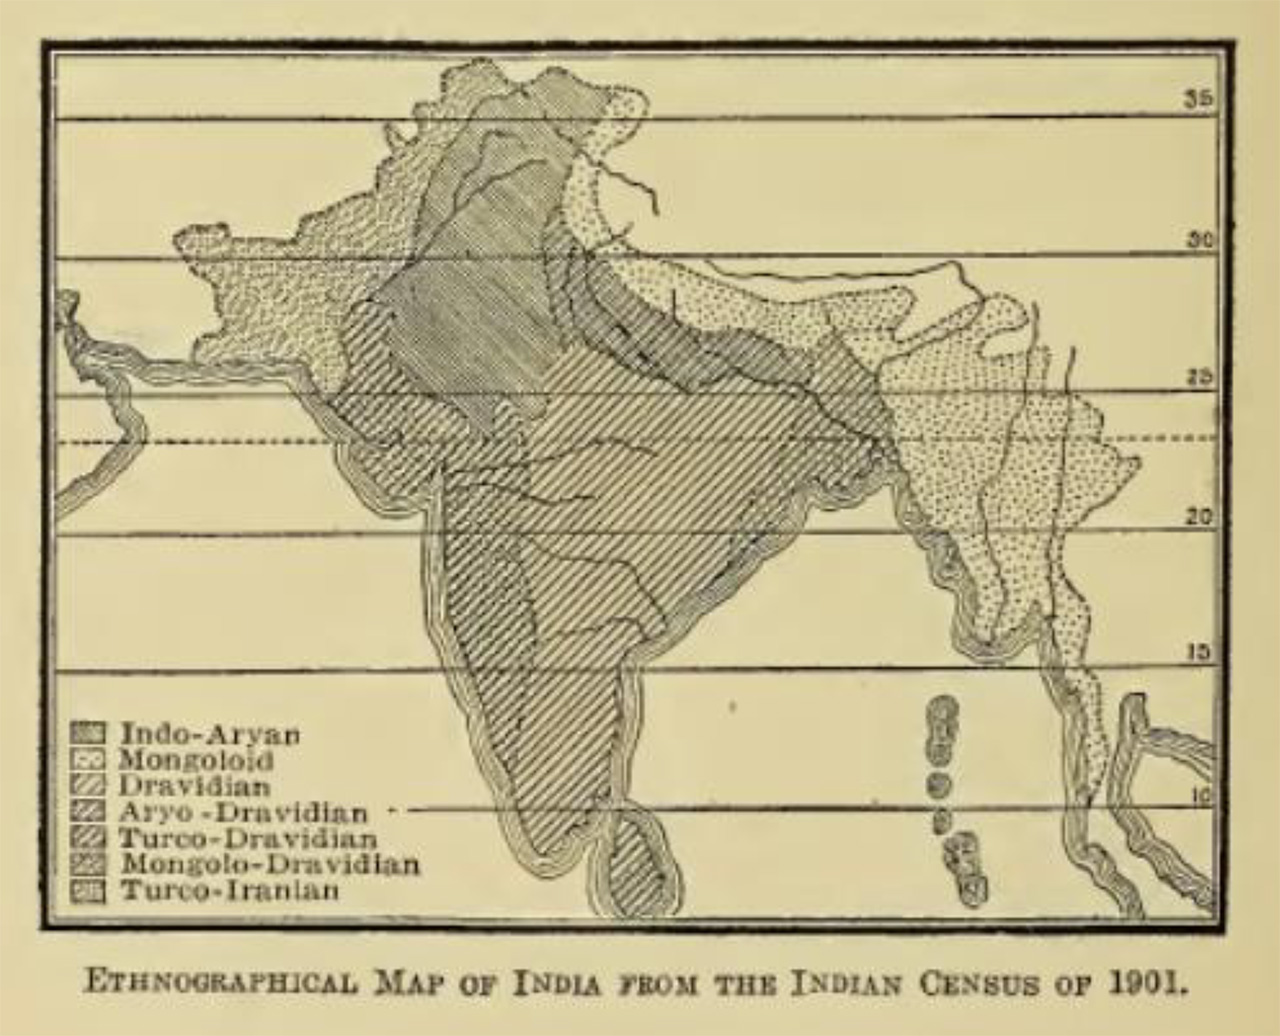 An ethnographic map of India from Ellen Semple's Influences of Geographic Environment (1911).